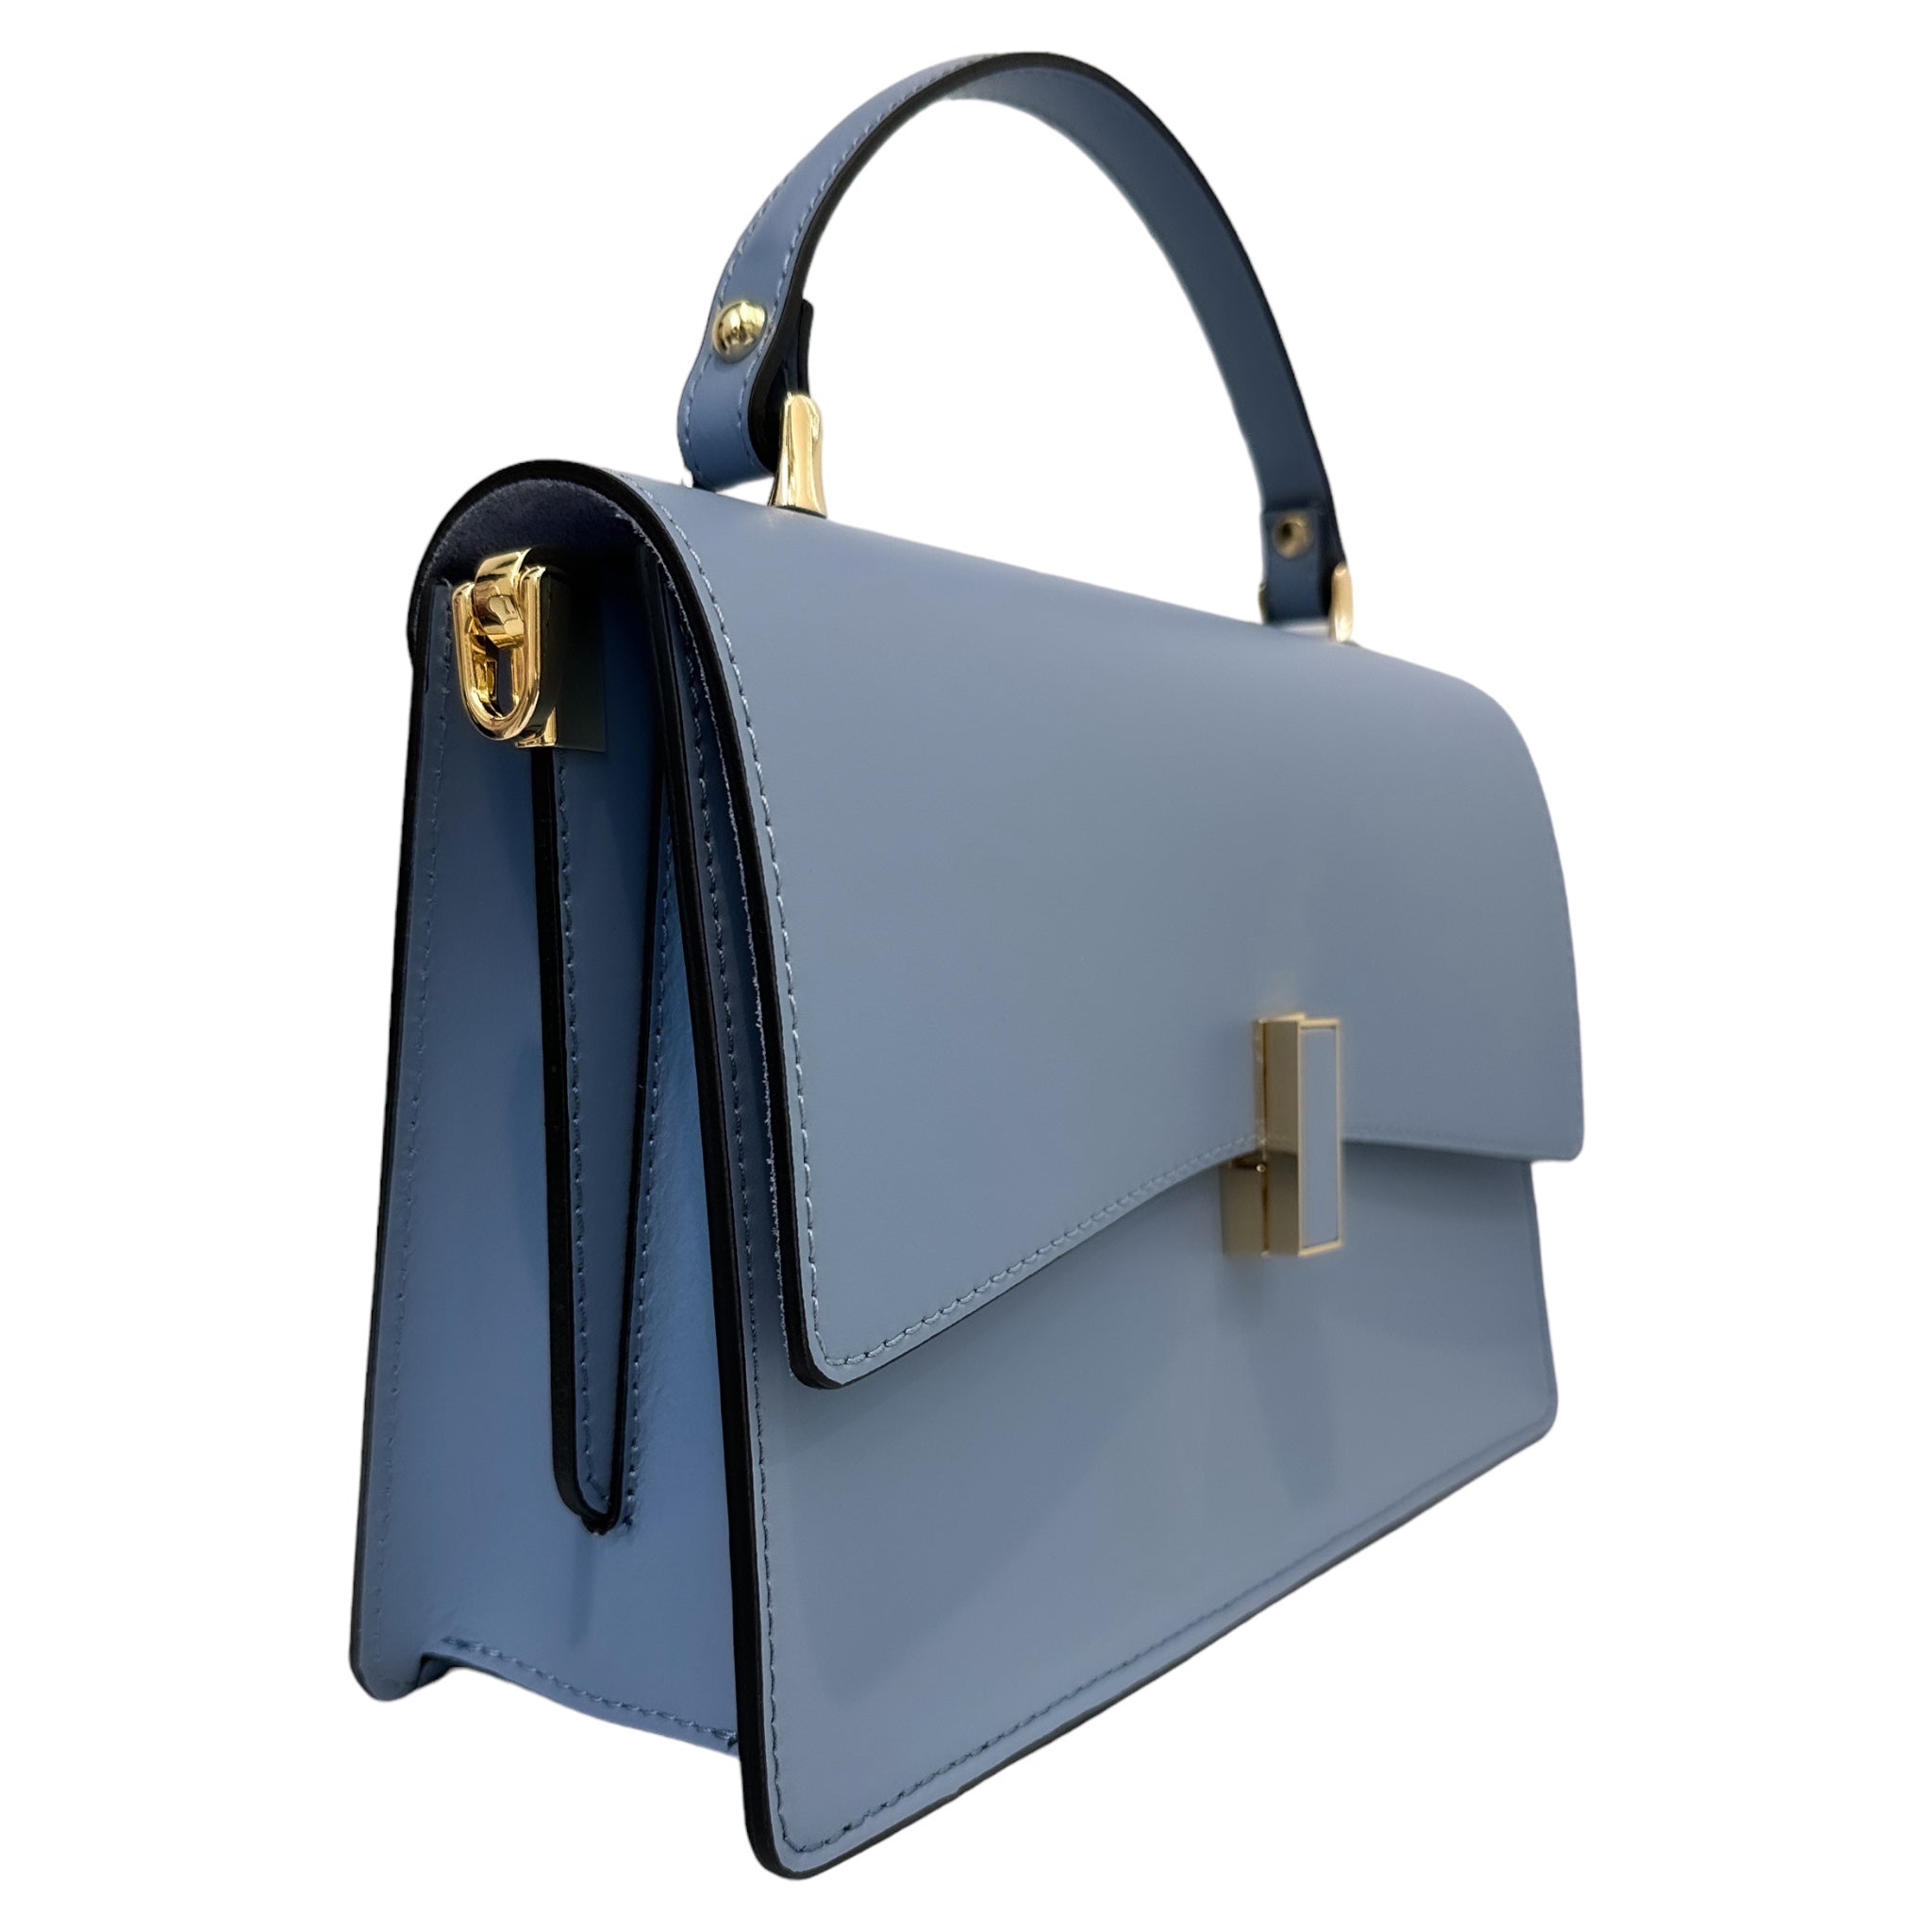 The NORA Top Handle Bag